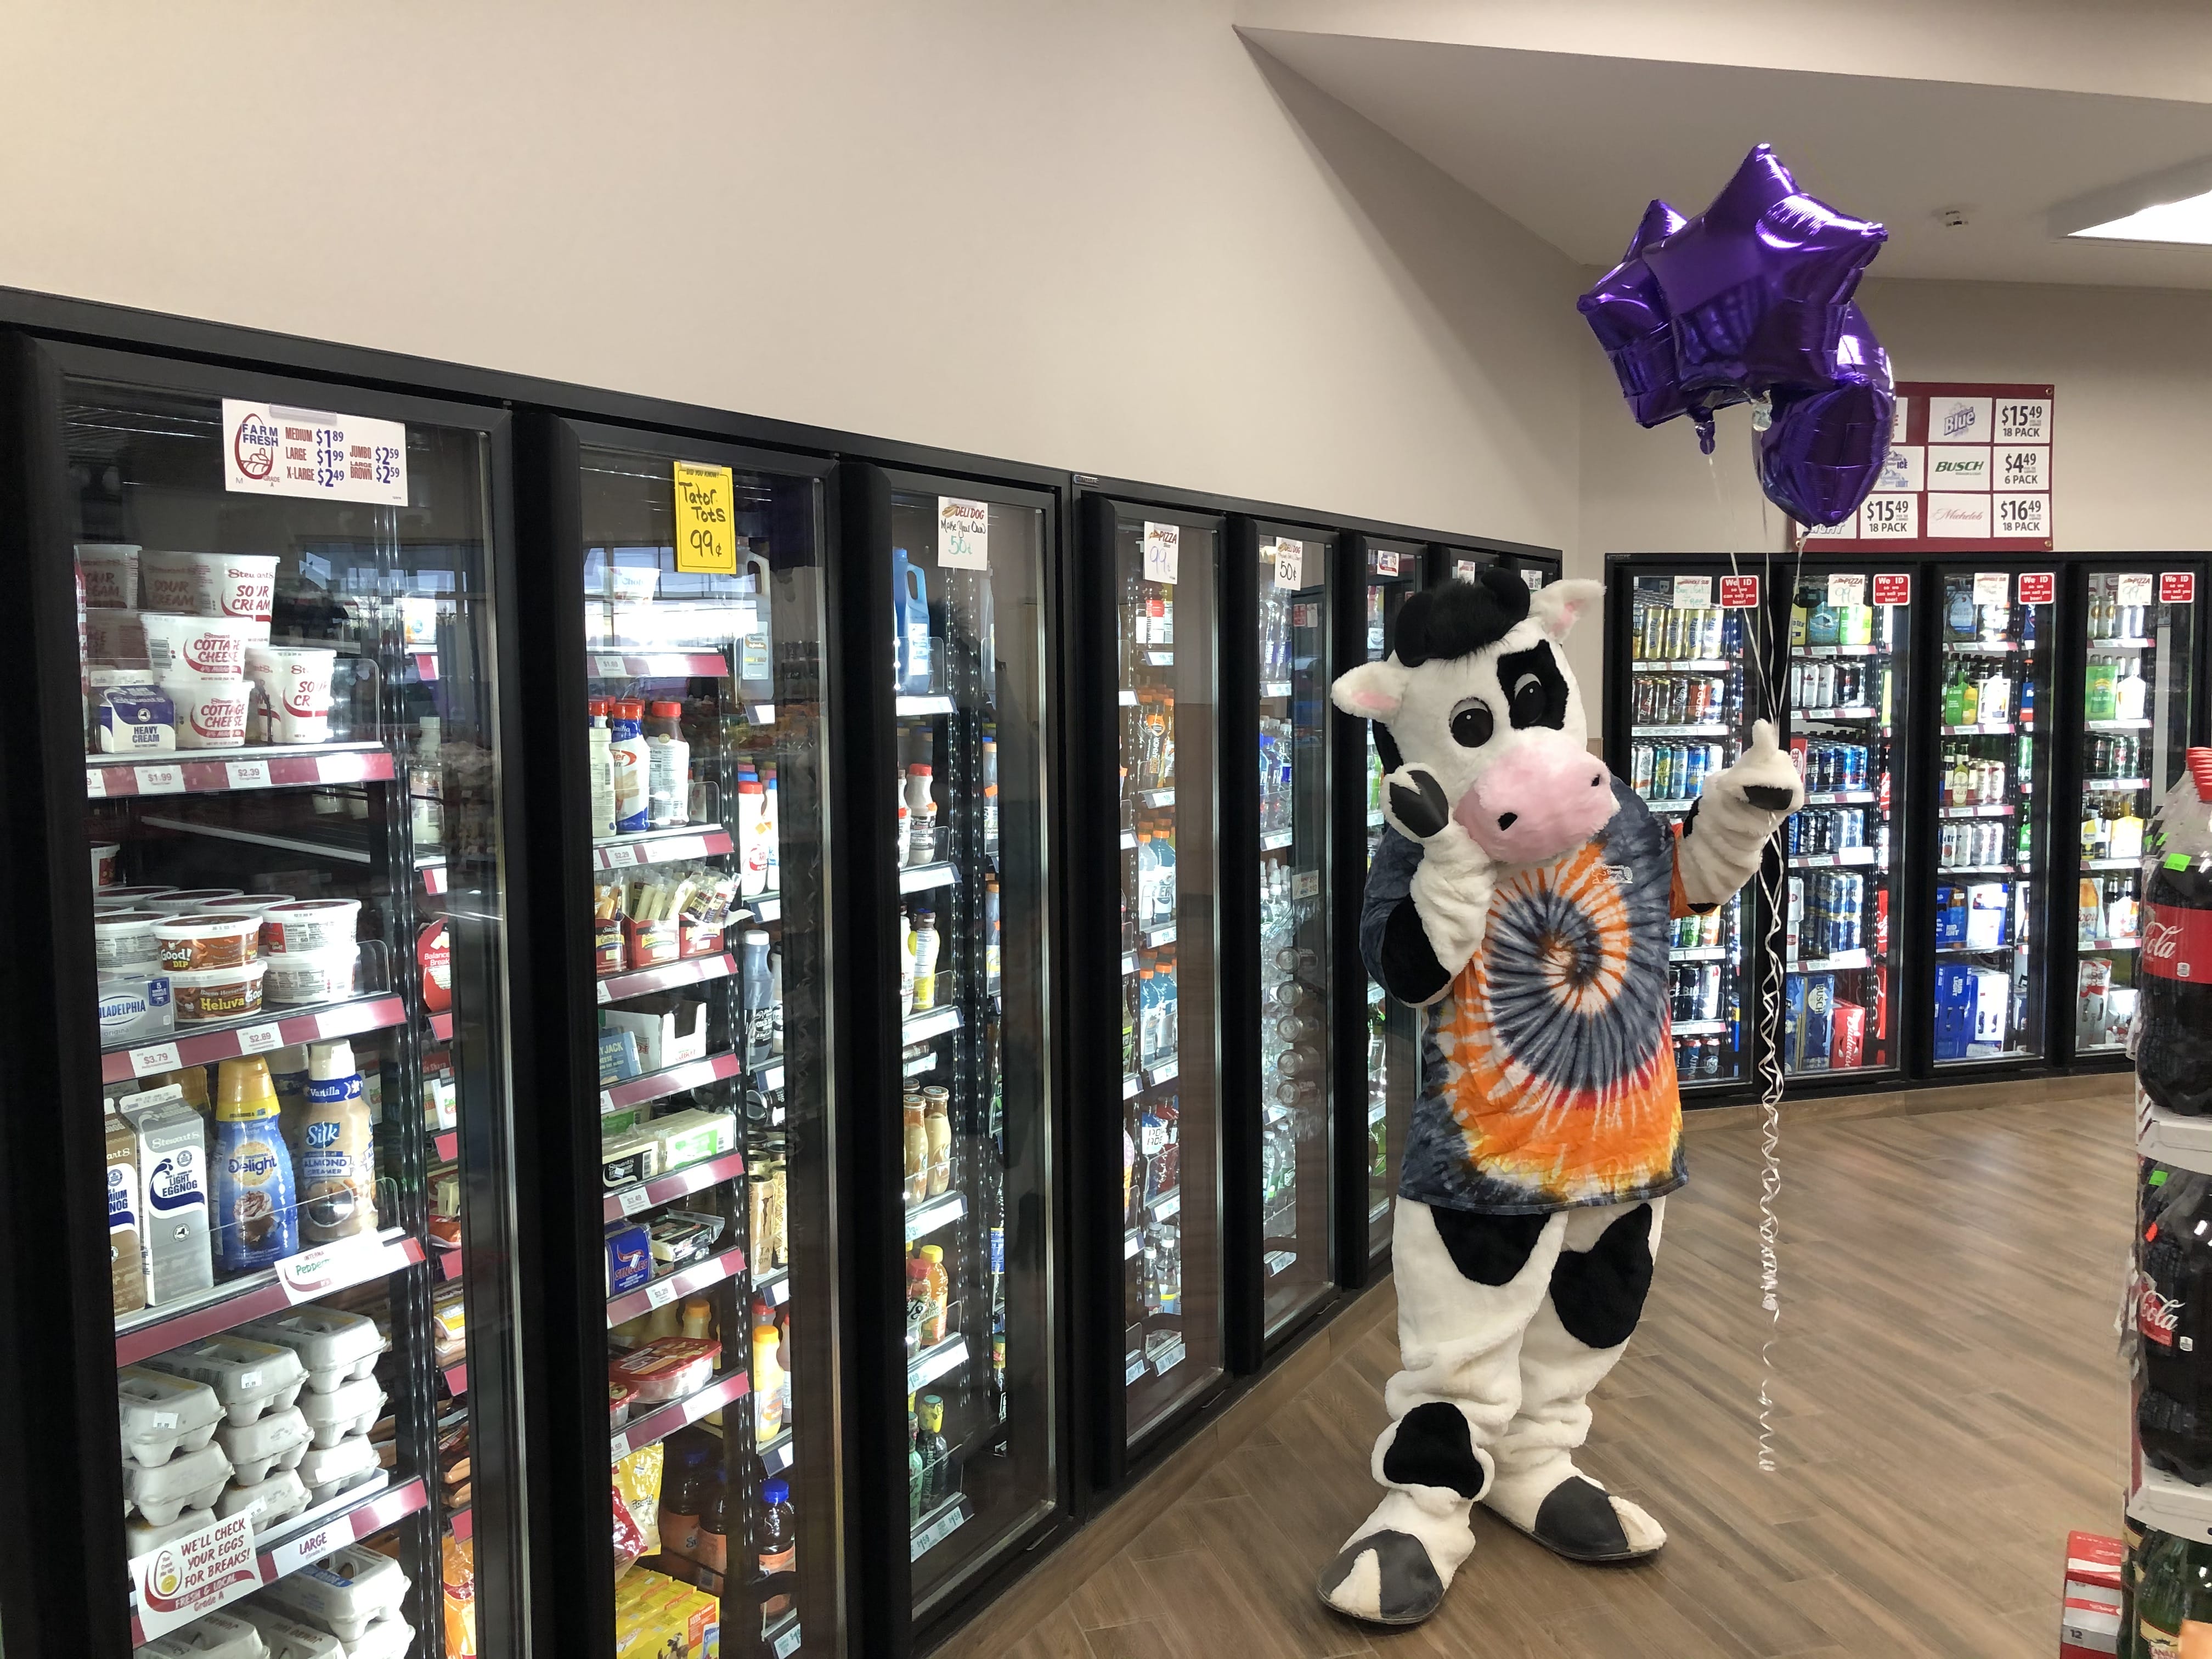 Flavor the cow holding three purple balloons by the coolers